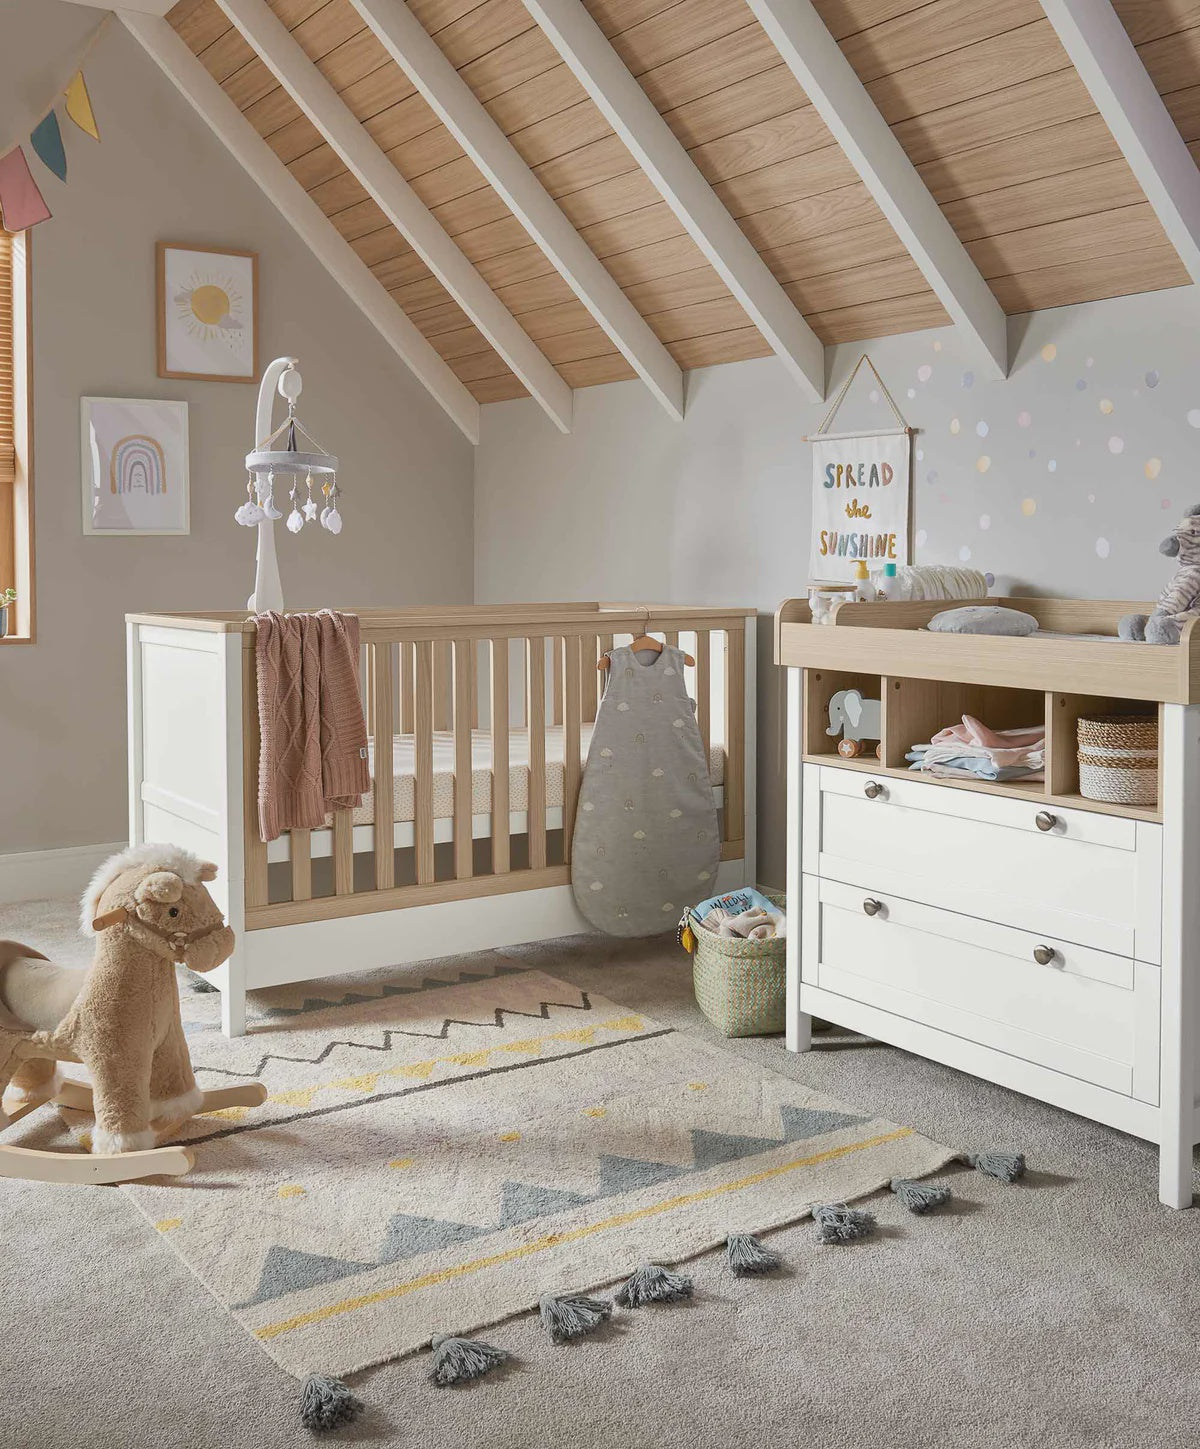 Mamas And Papas Harwell 2 Piece Cot Bed Set With Dresser Changer Oak/White